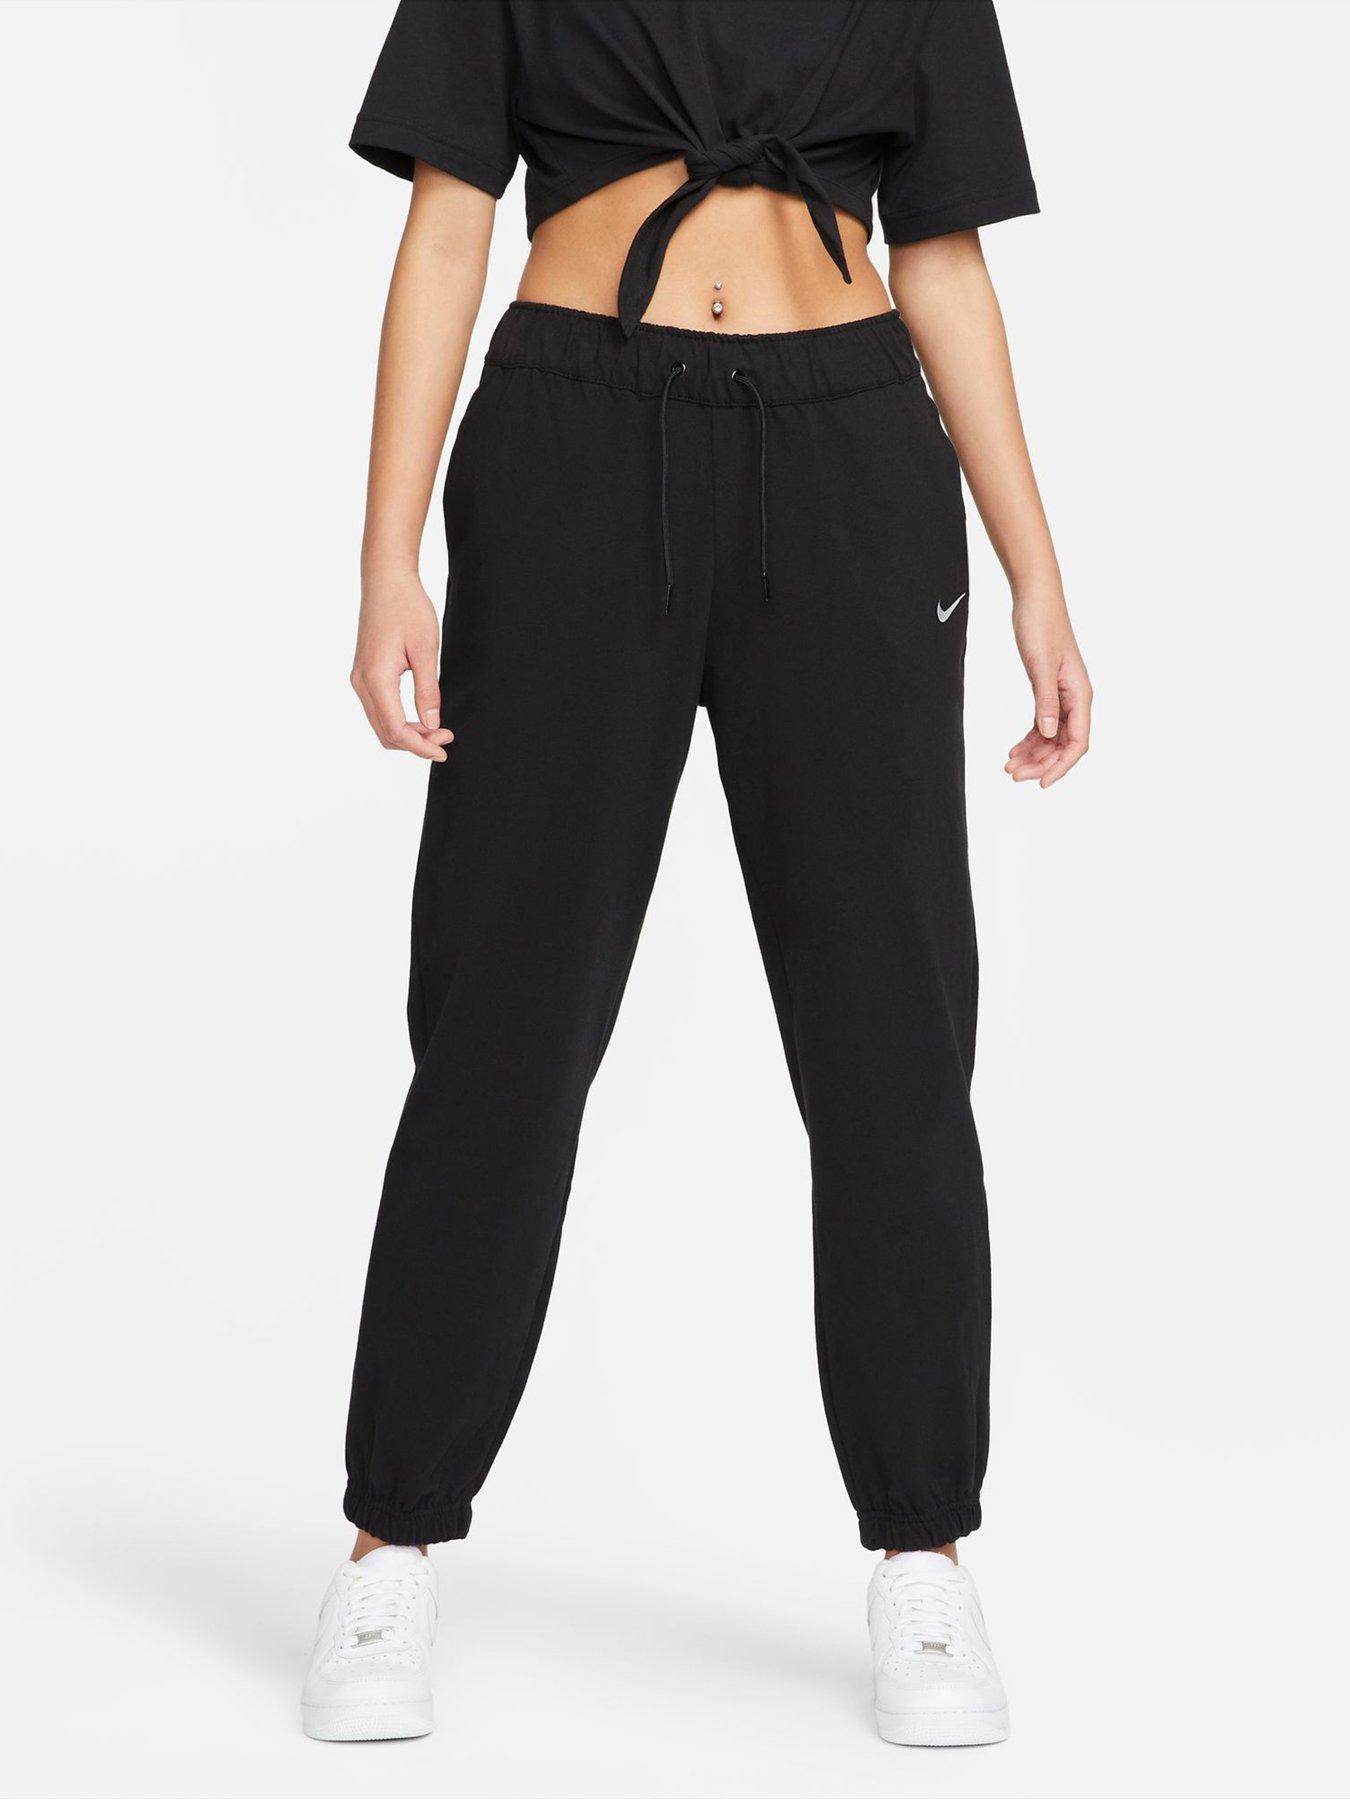 Jogging bottoms, Womens sports clothing, Sports & leisure, Nike